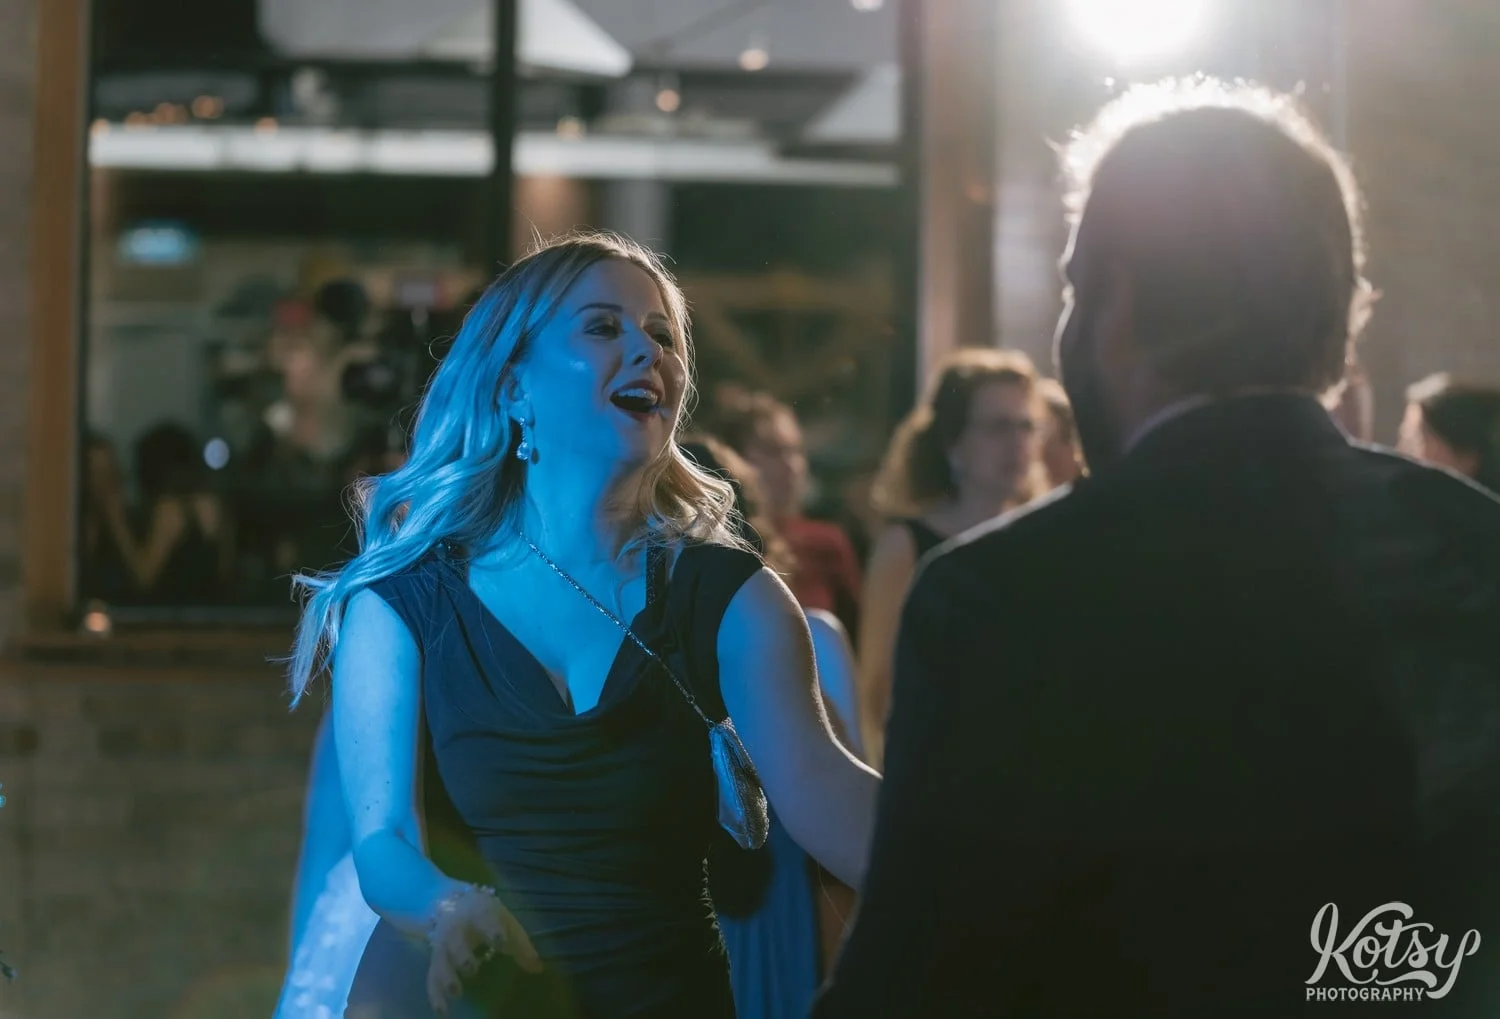 A woman in a green dress dances with her mouth open in excitement during a Second Floor Events wedding reception in Toronto, Canada.